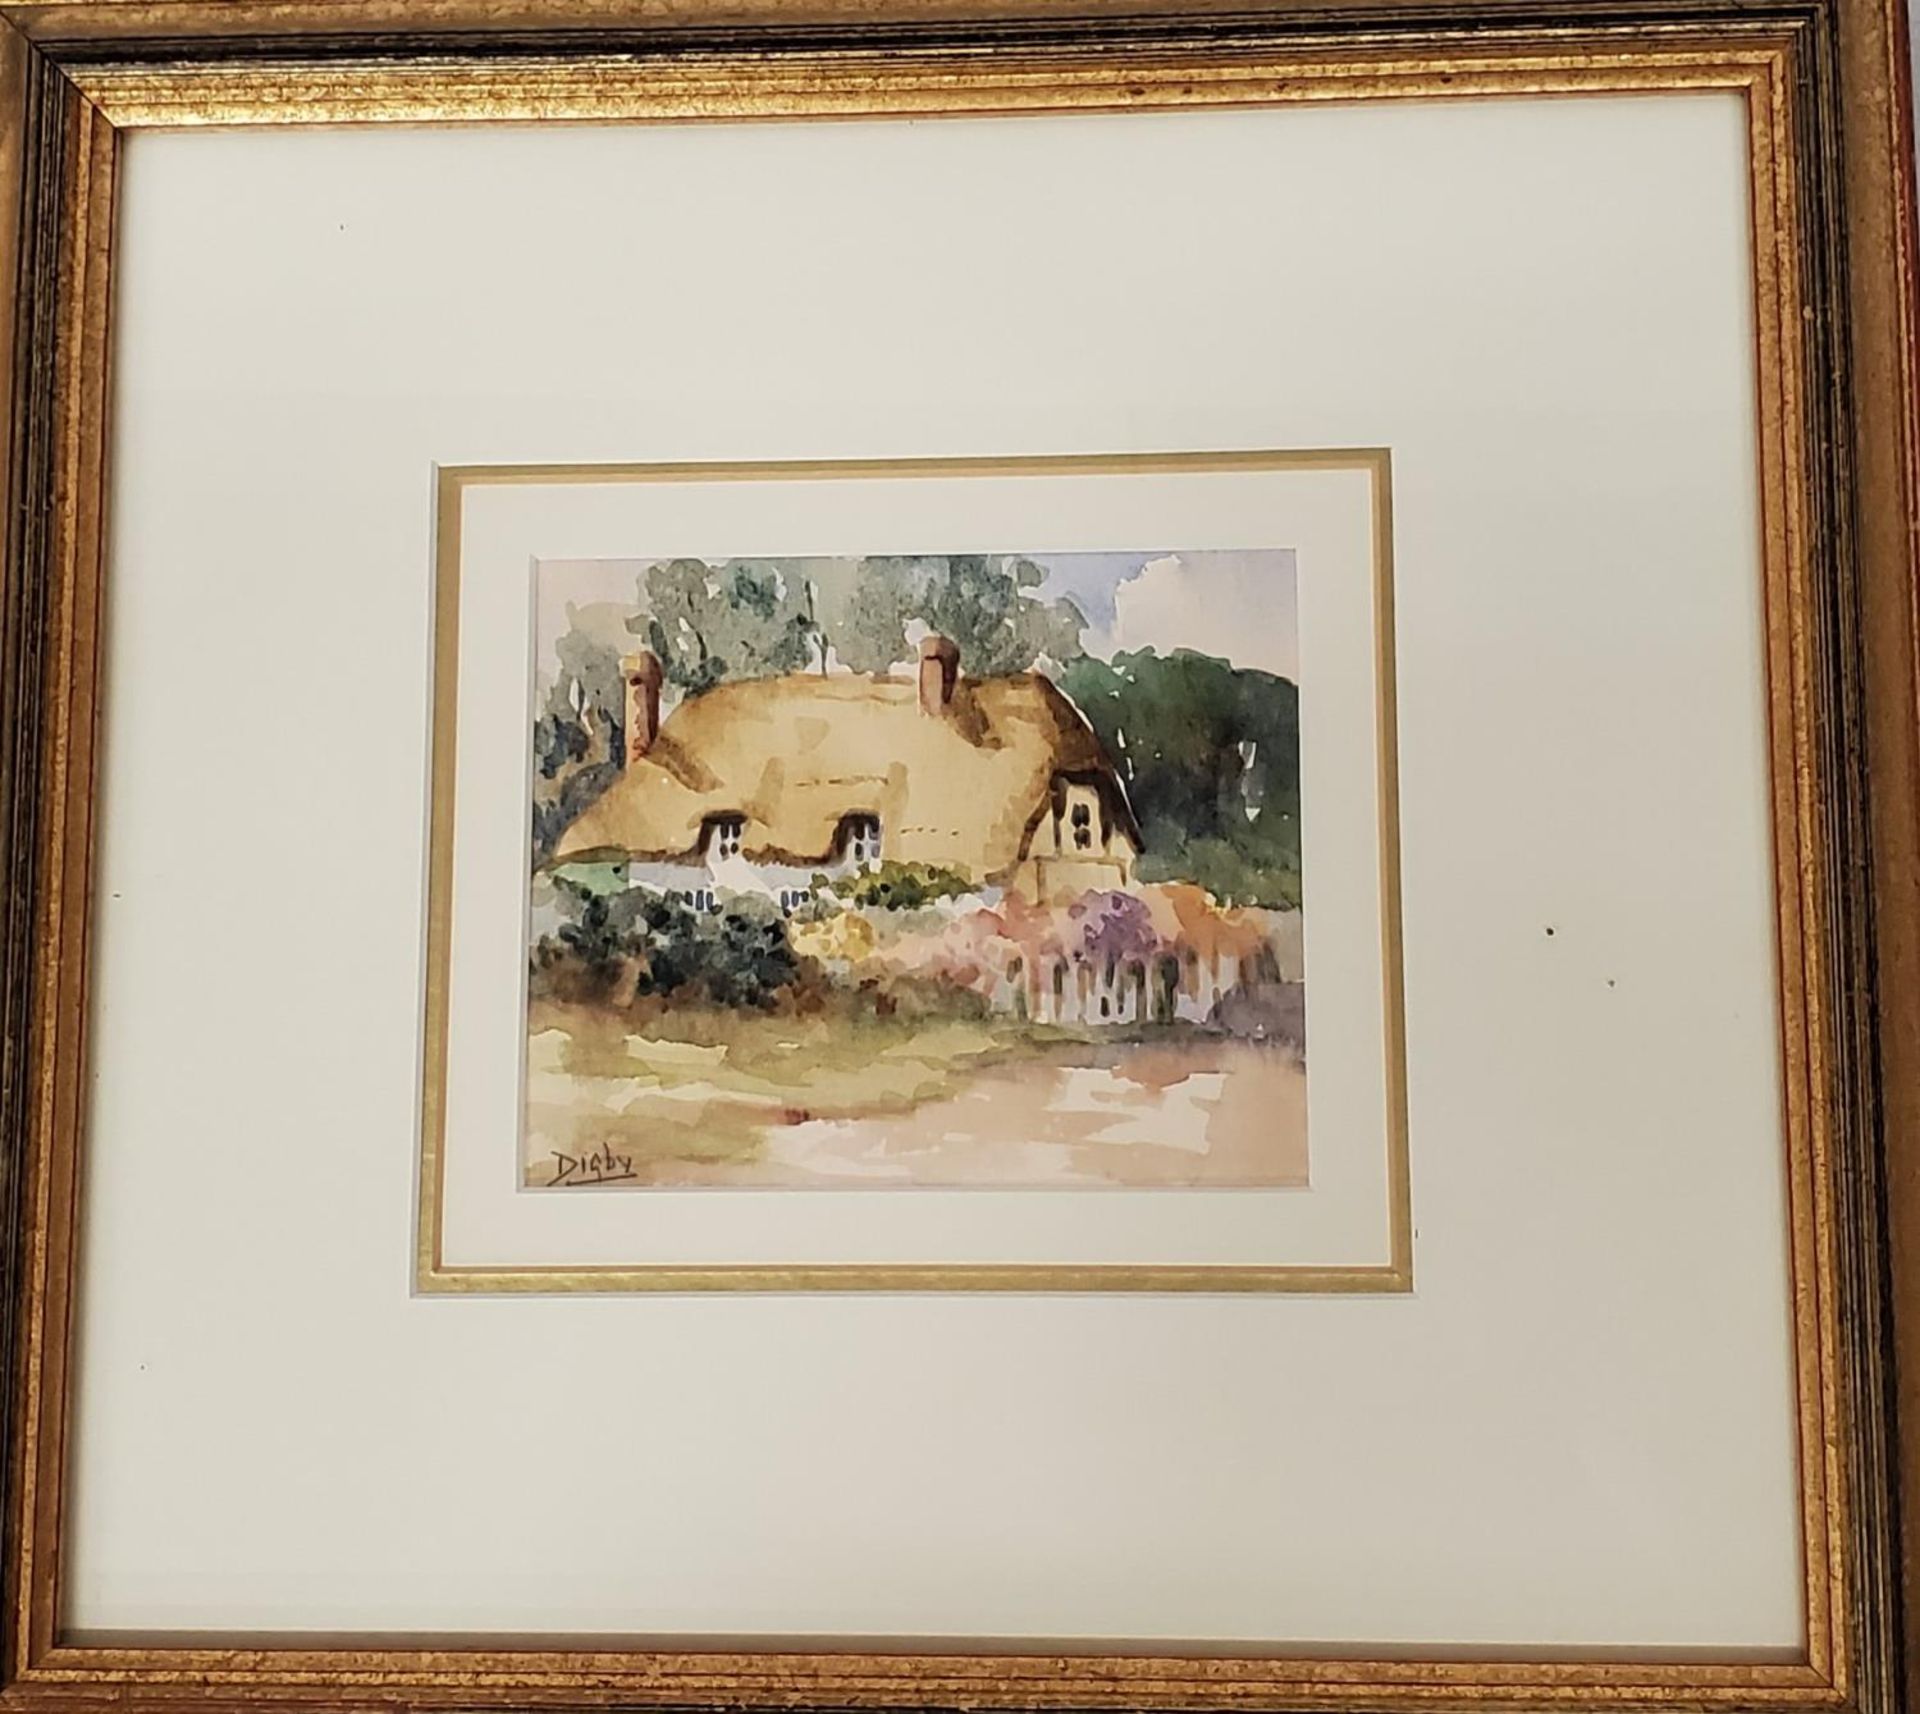 DIGBY (LATE 20TH/EARLY 21ST CENTURY) THATCHED COTTAGE, WATERCOLOUR, SIGNED, 10X12.5CM, FRAMED AND